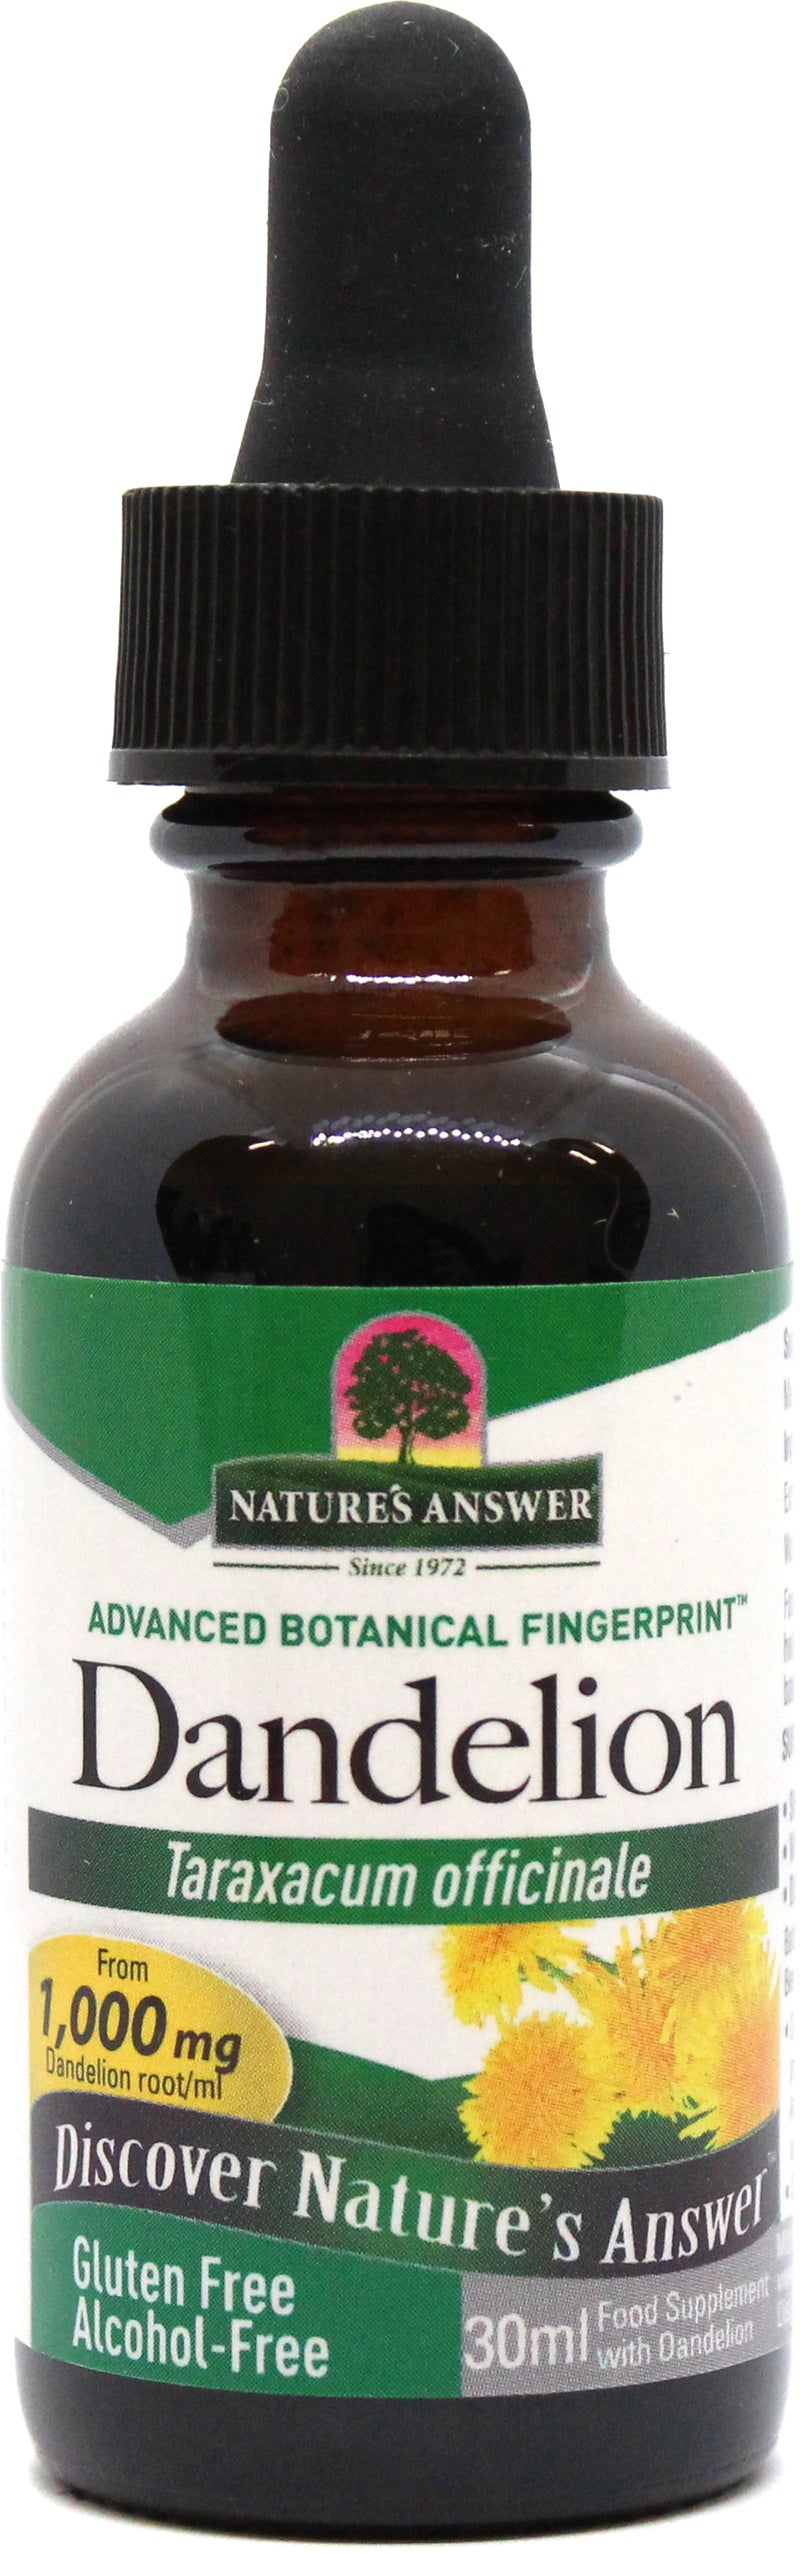 Nature’s Answer Dandelion Root (Alcohol-Free)